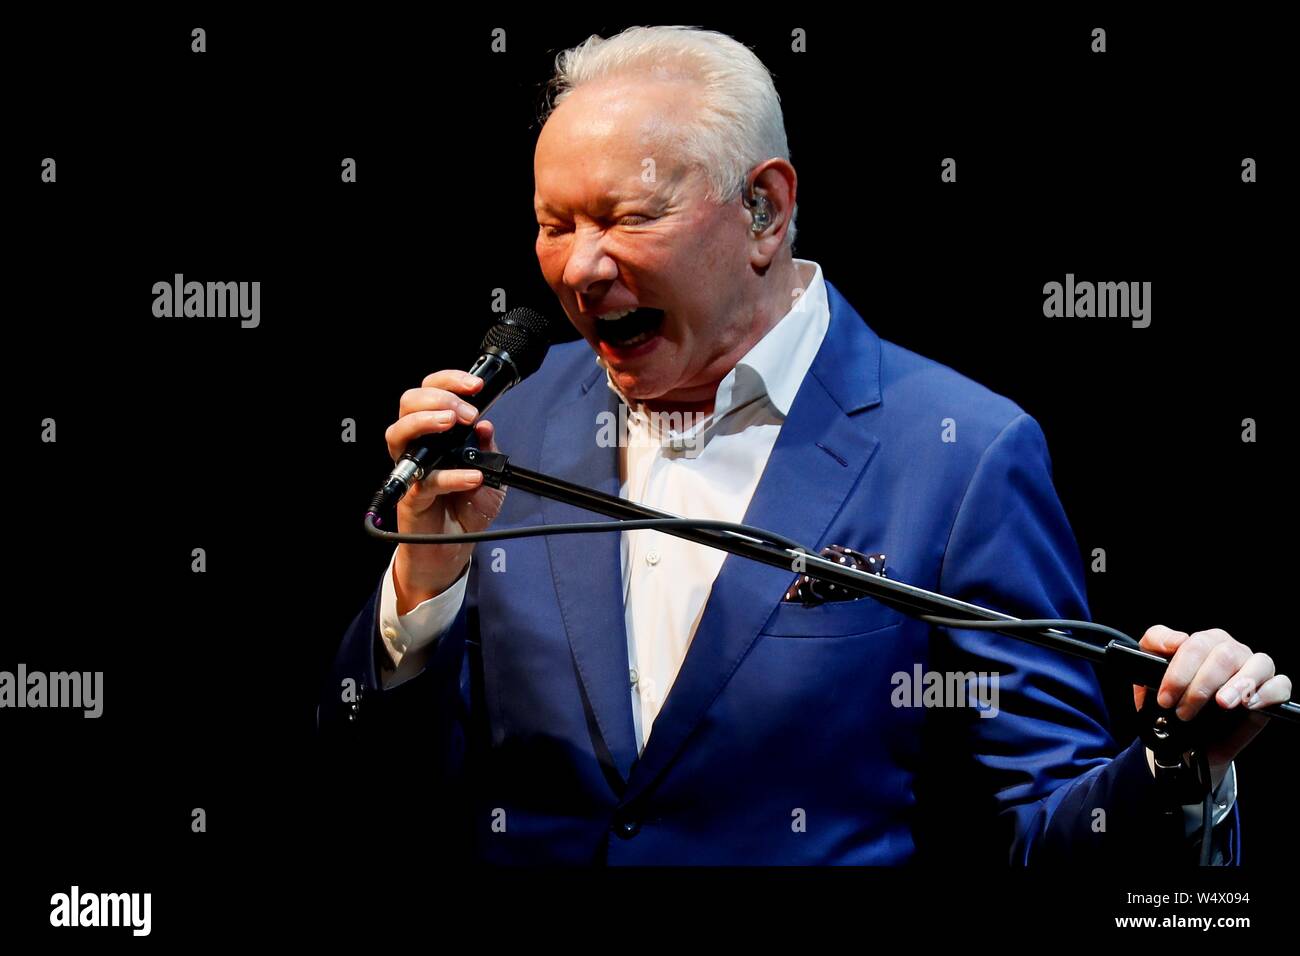 British Singer And Musician Joe Jackson Performs On Stage During